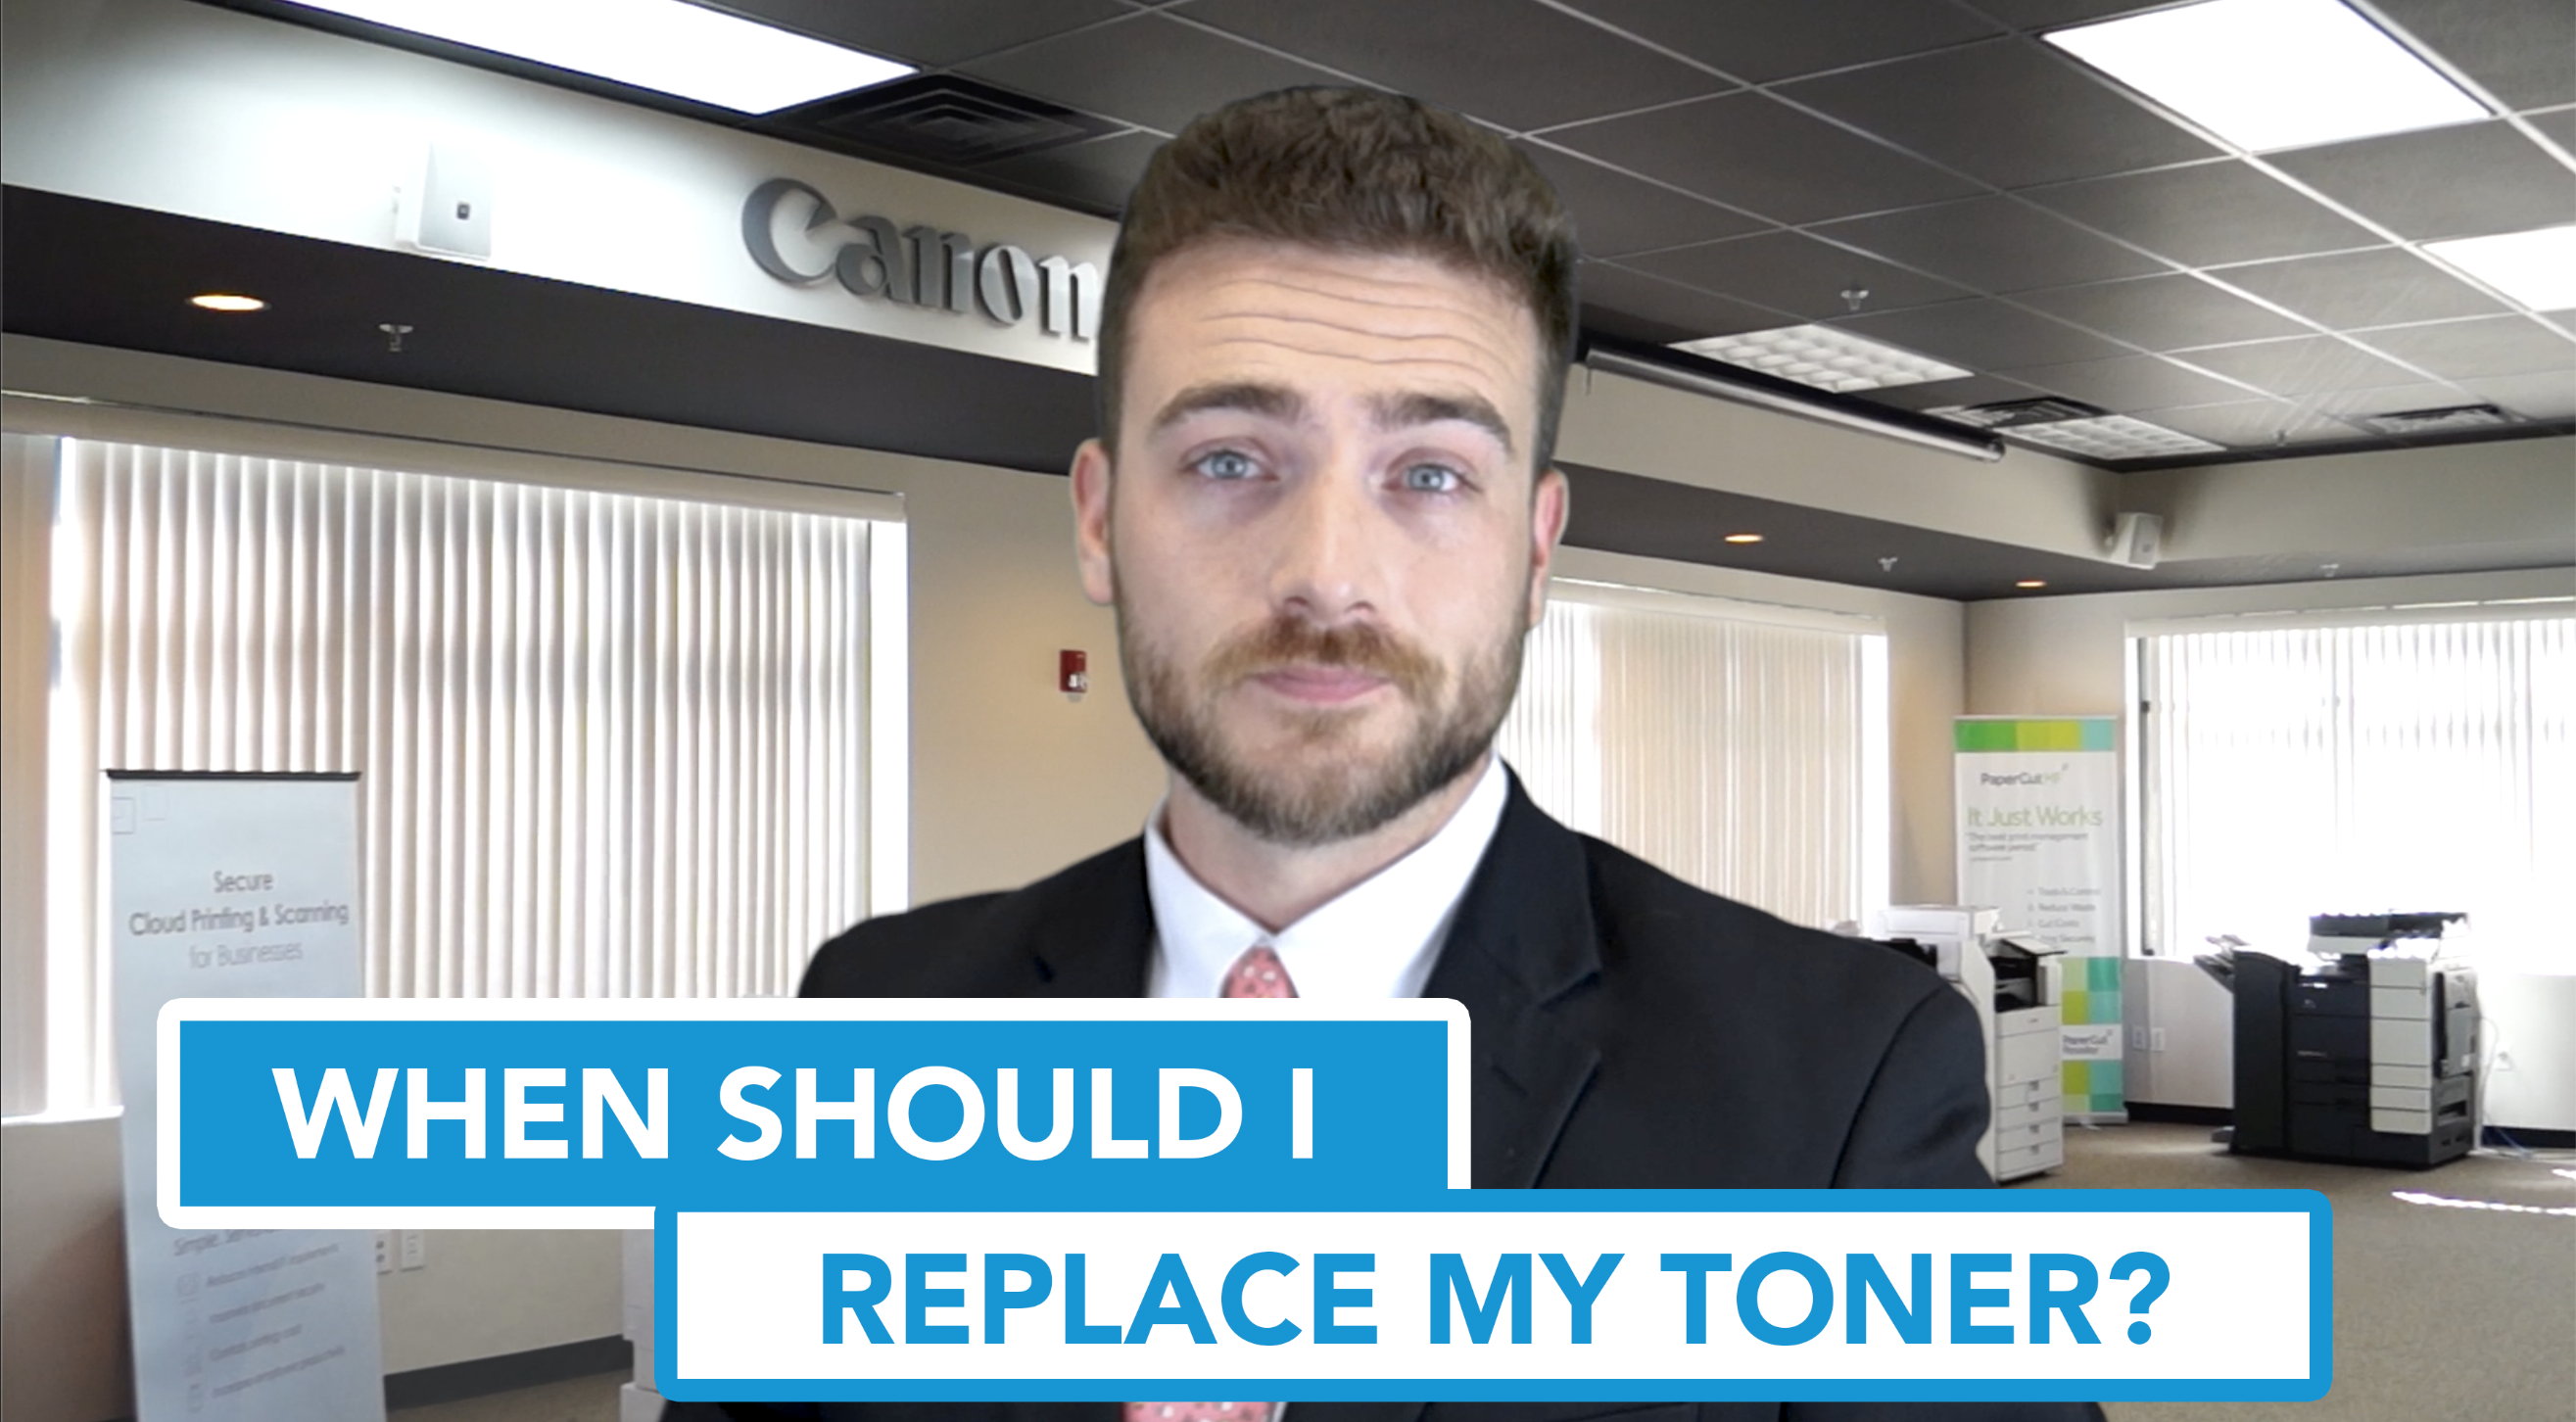 When should I replace my toner?